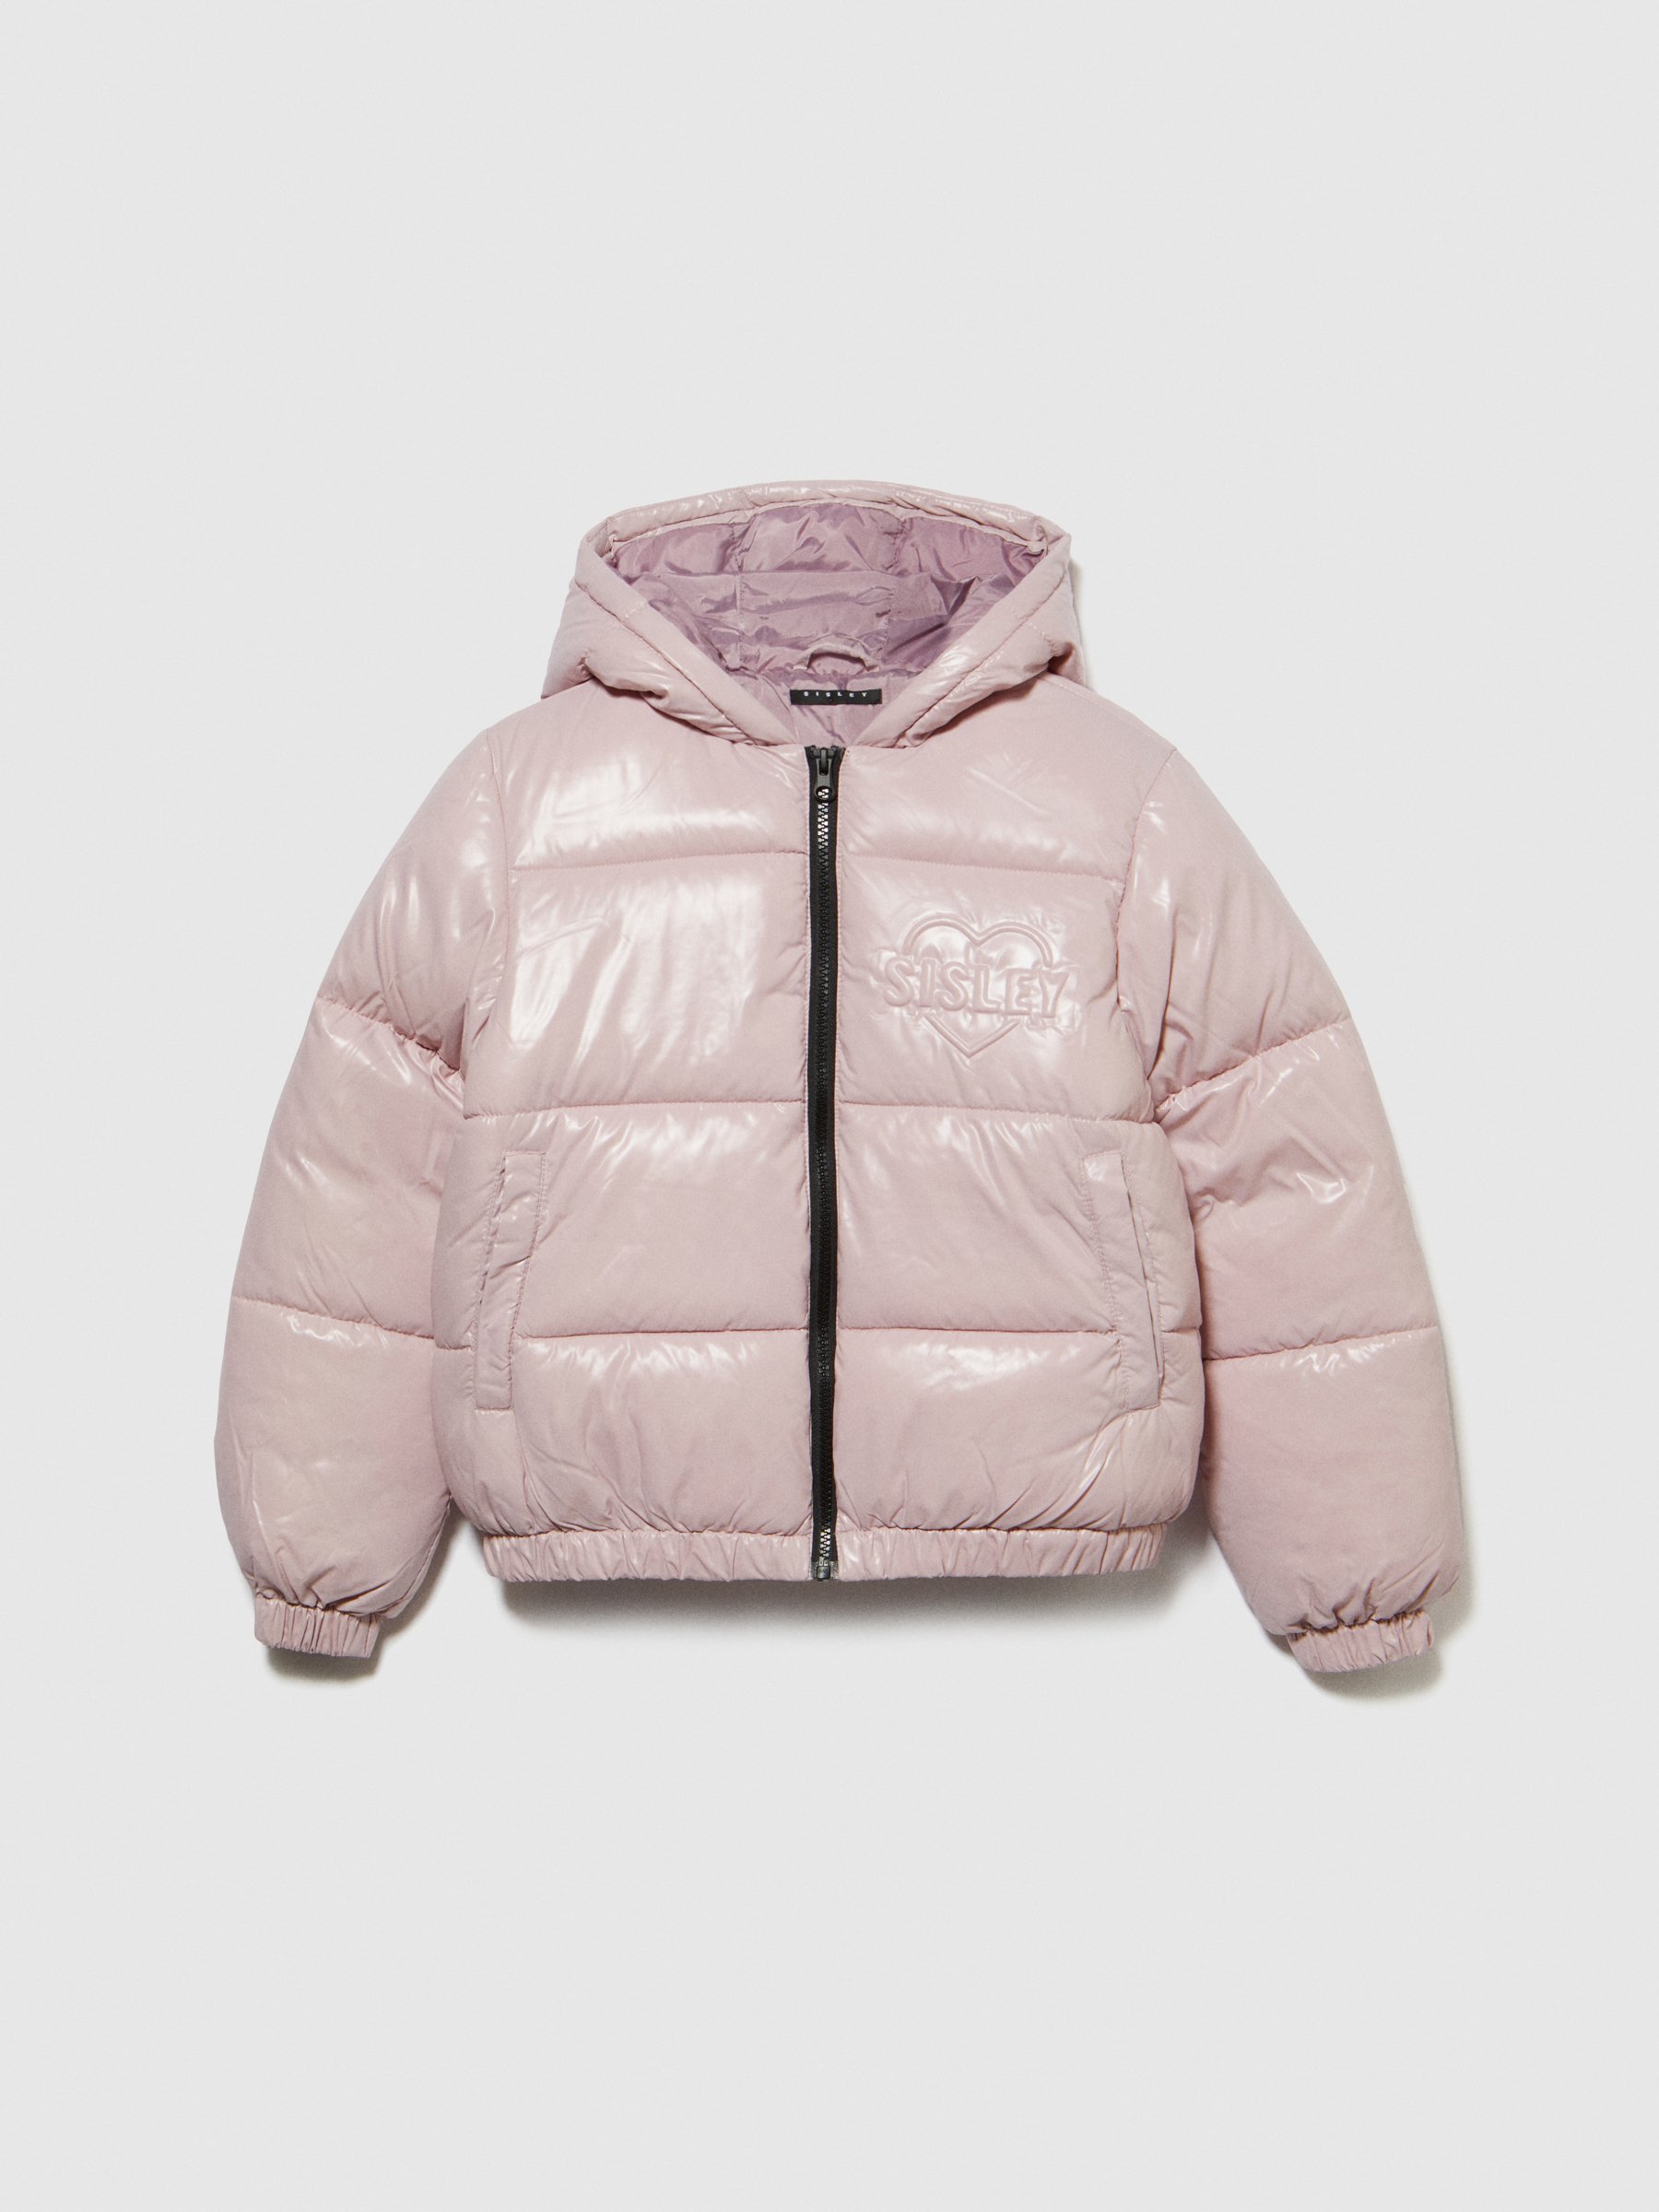 Sisley Young - Padded Jacket With Embossed Print, Woman, Pastel Pink, Size: EL